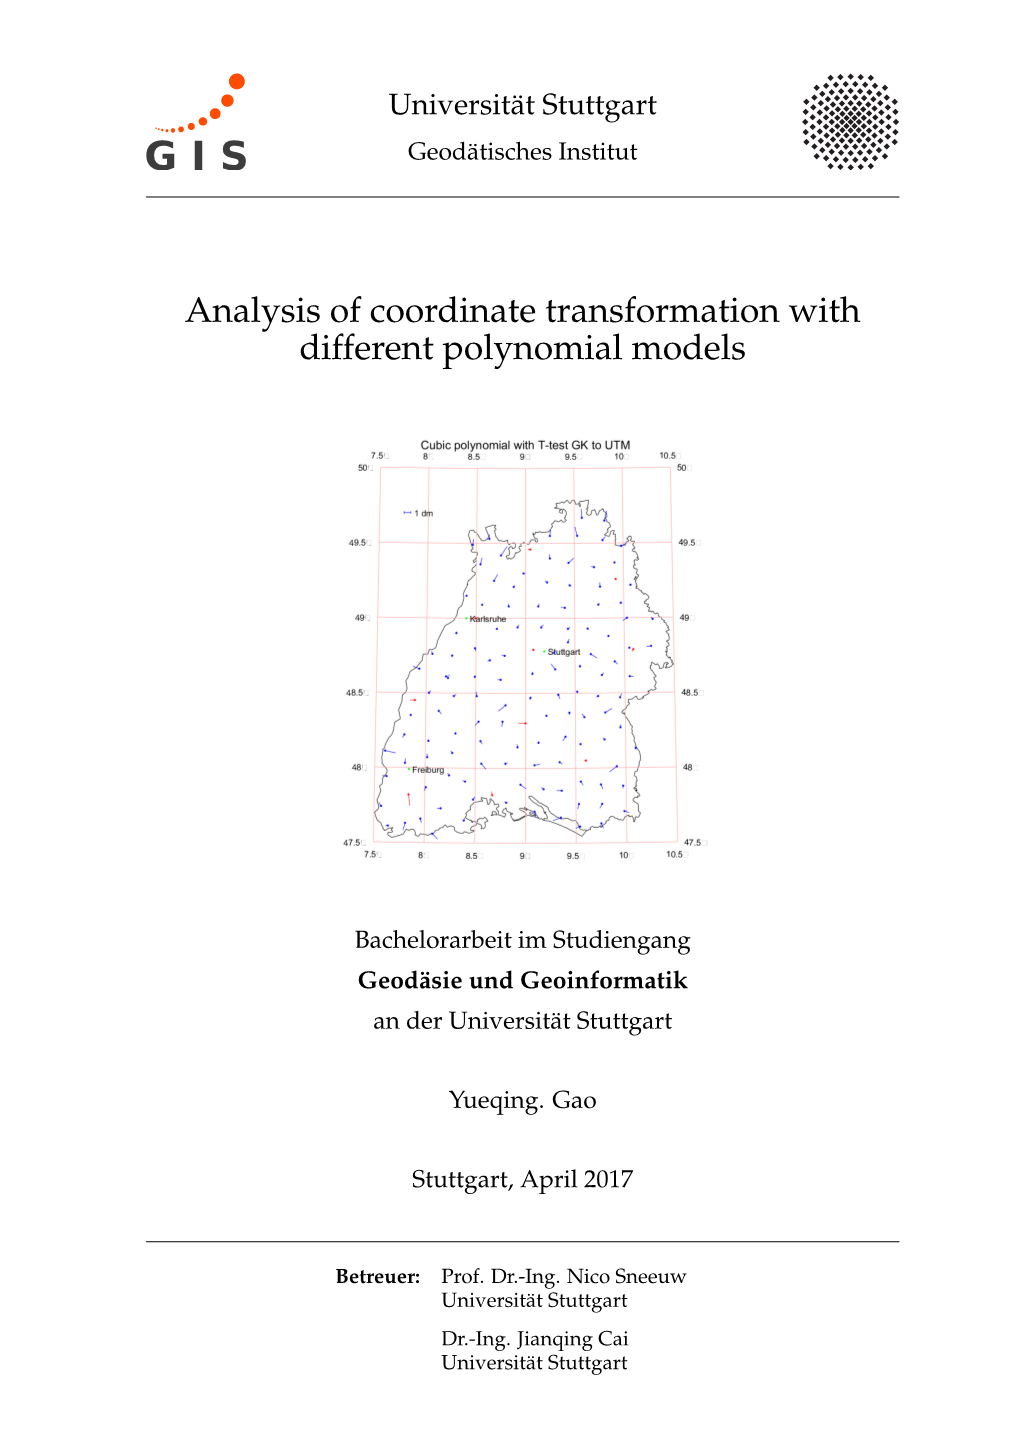 Analysis of Coordinate Transformation with Different Polynomial Models